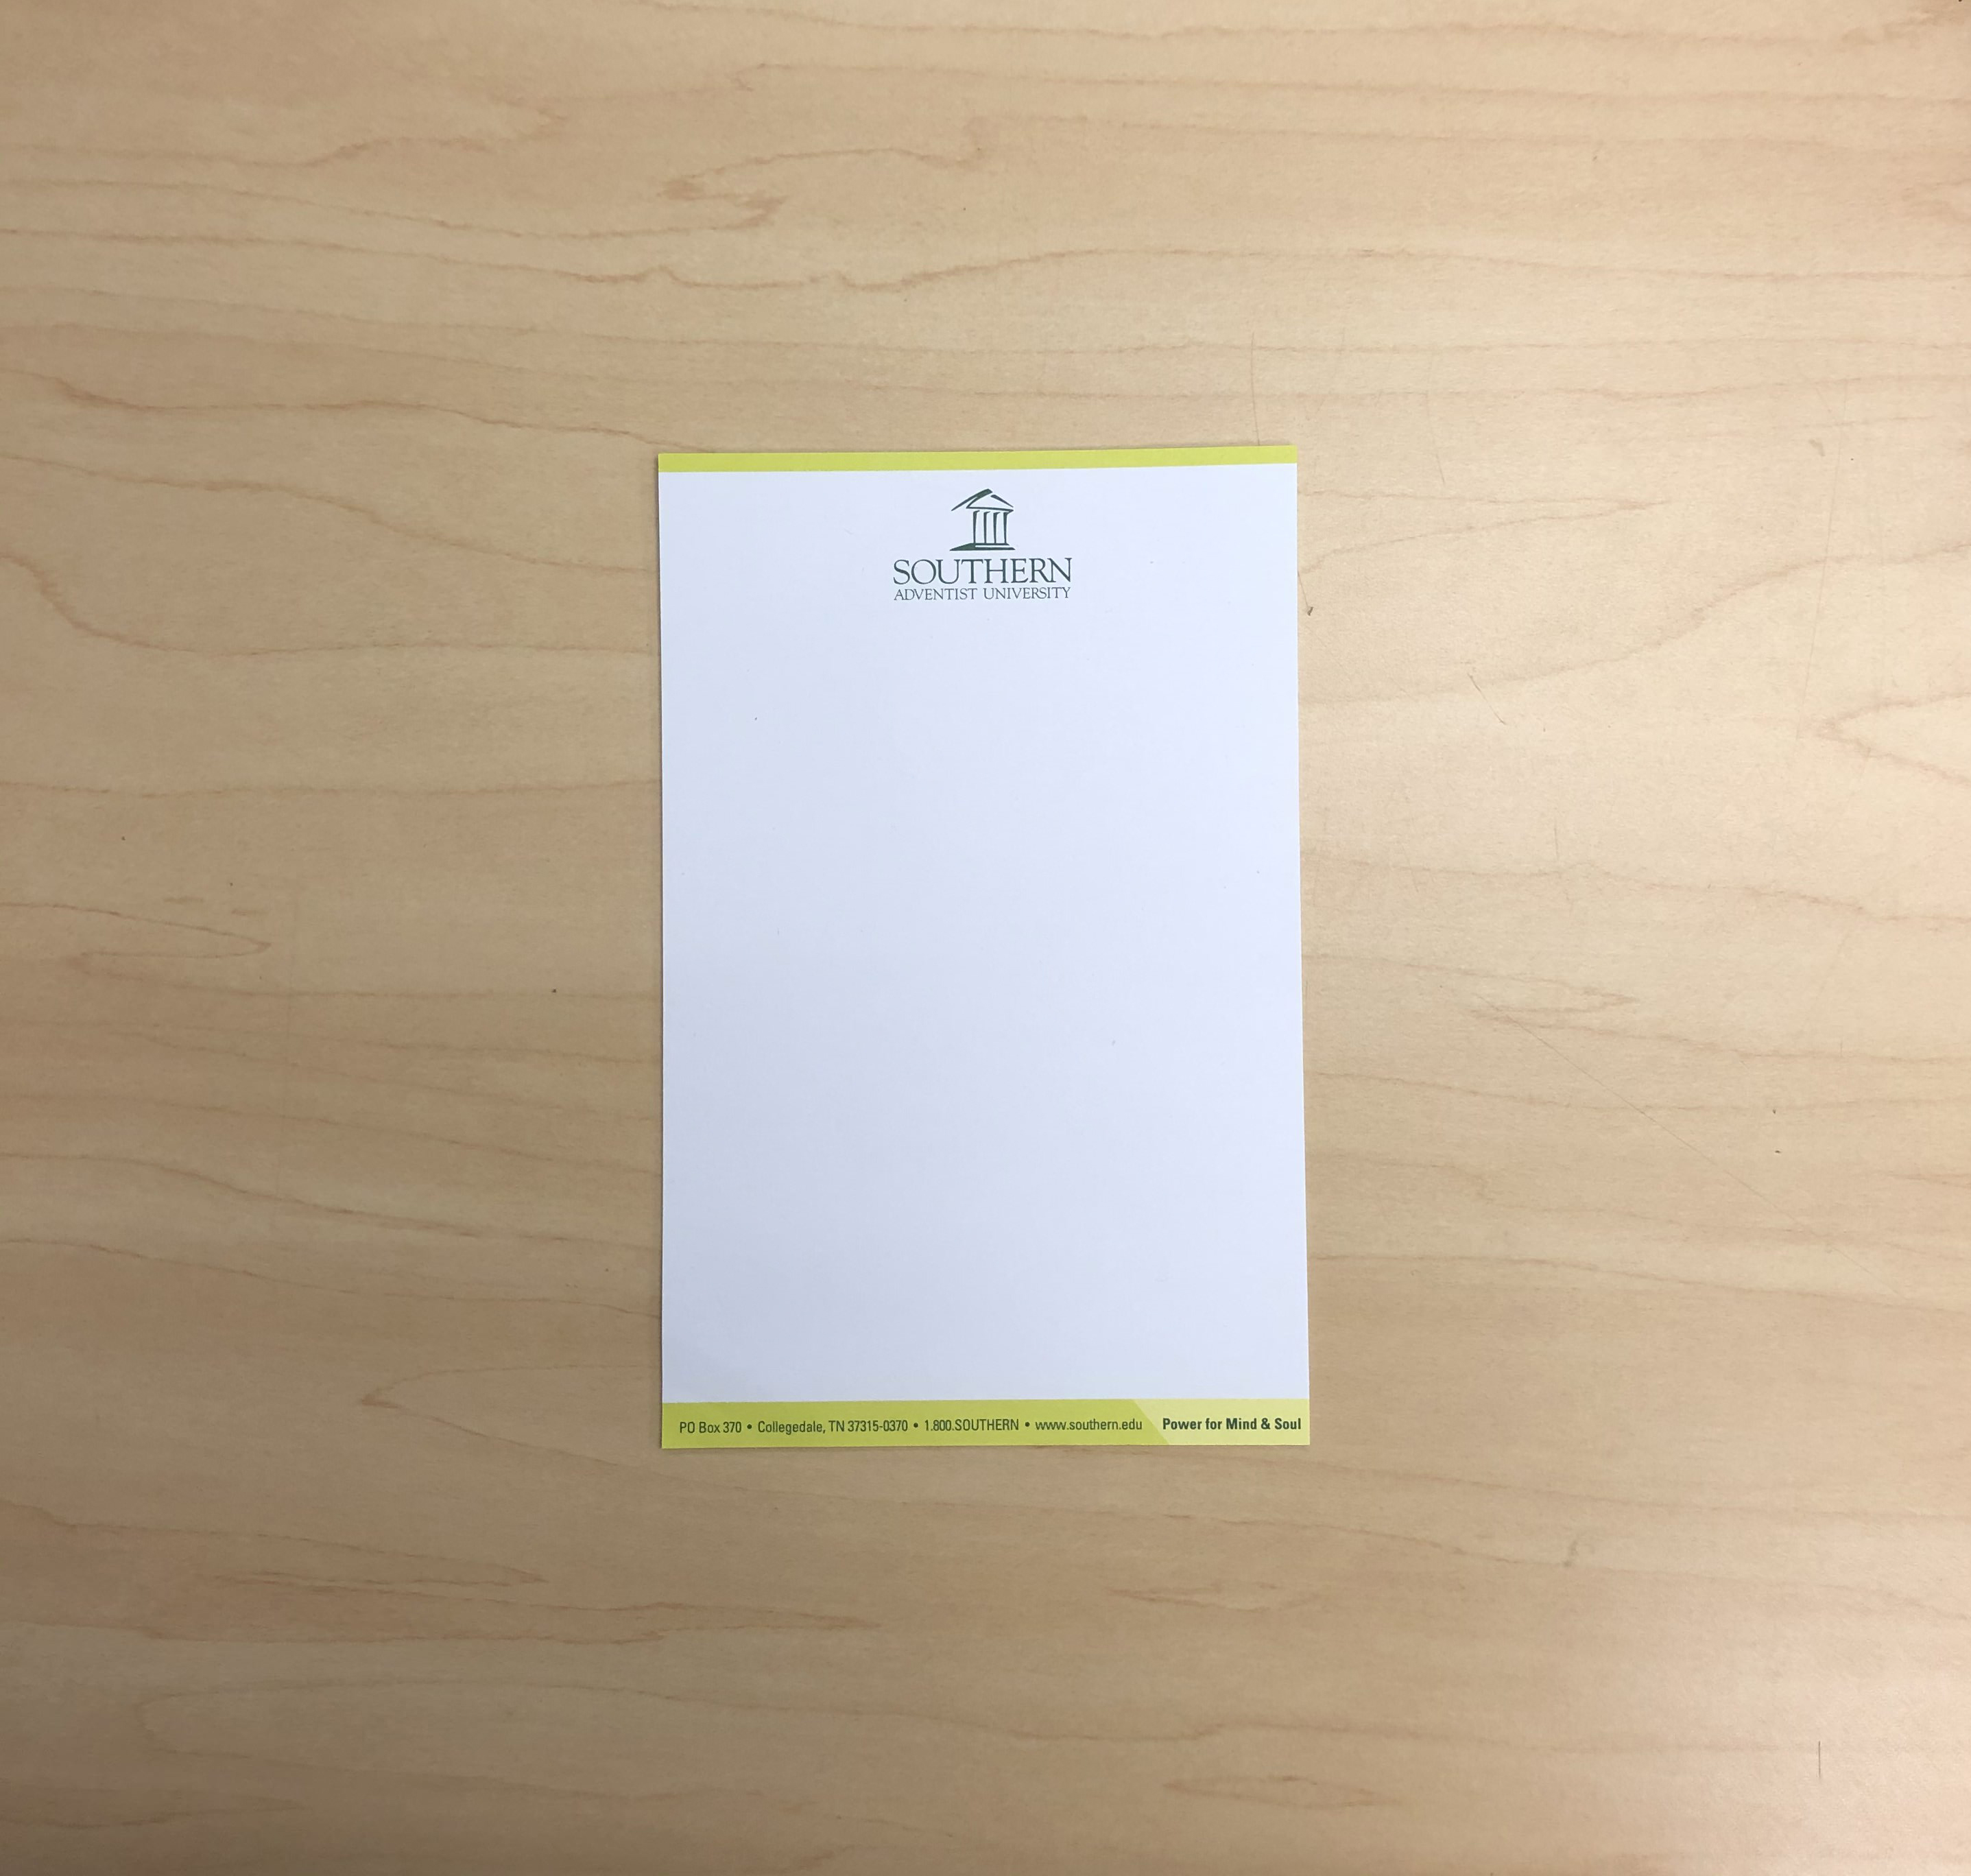 Southern branded notepads